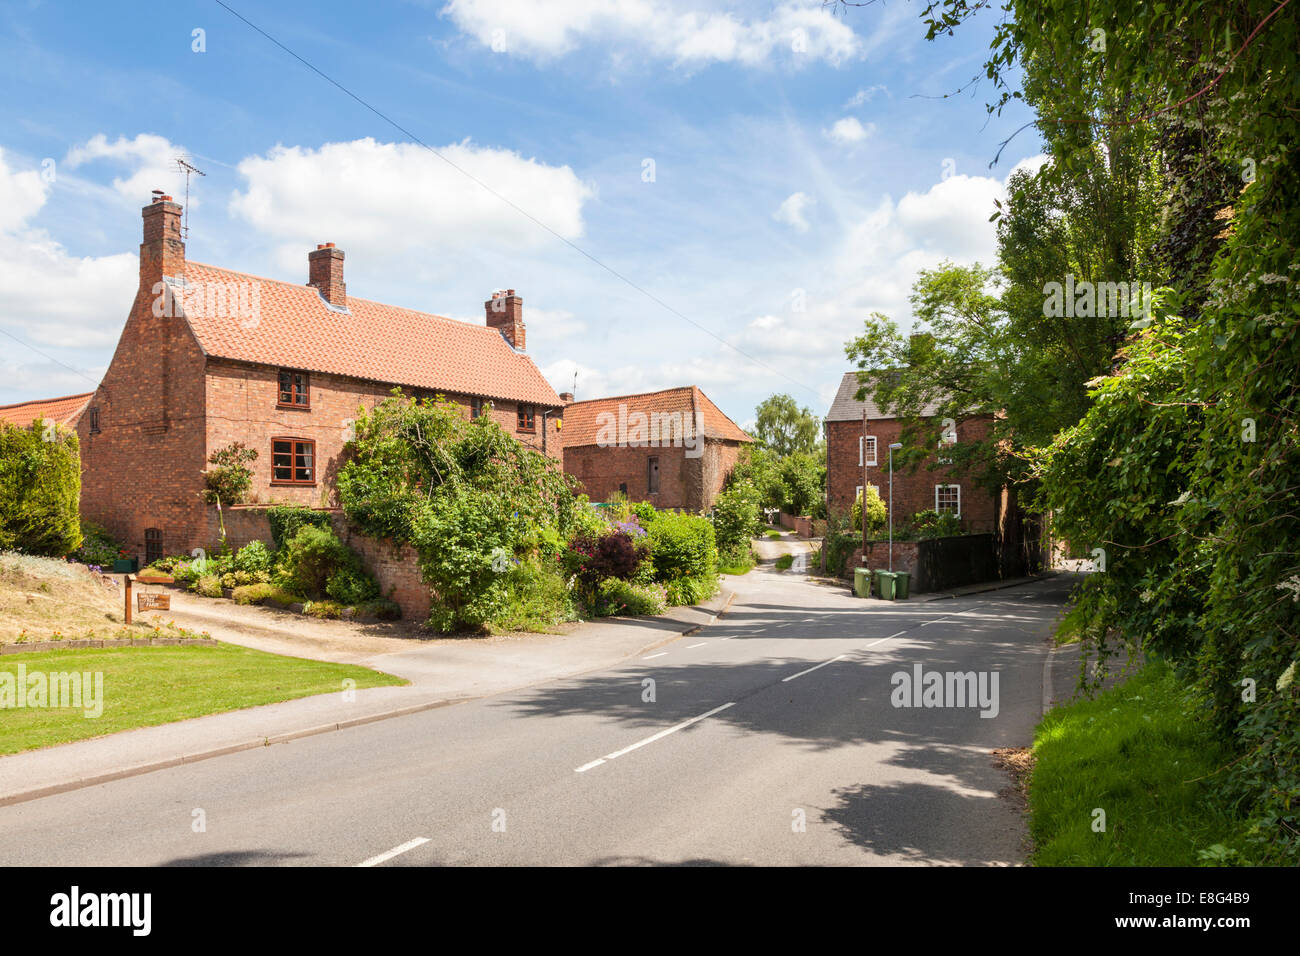 Old and new houses in the village of Eakring, Nottinghamshire, England, UK Stock Photo